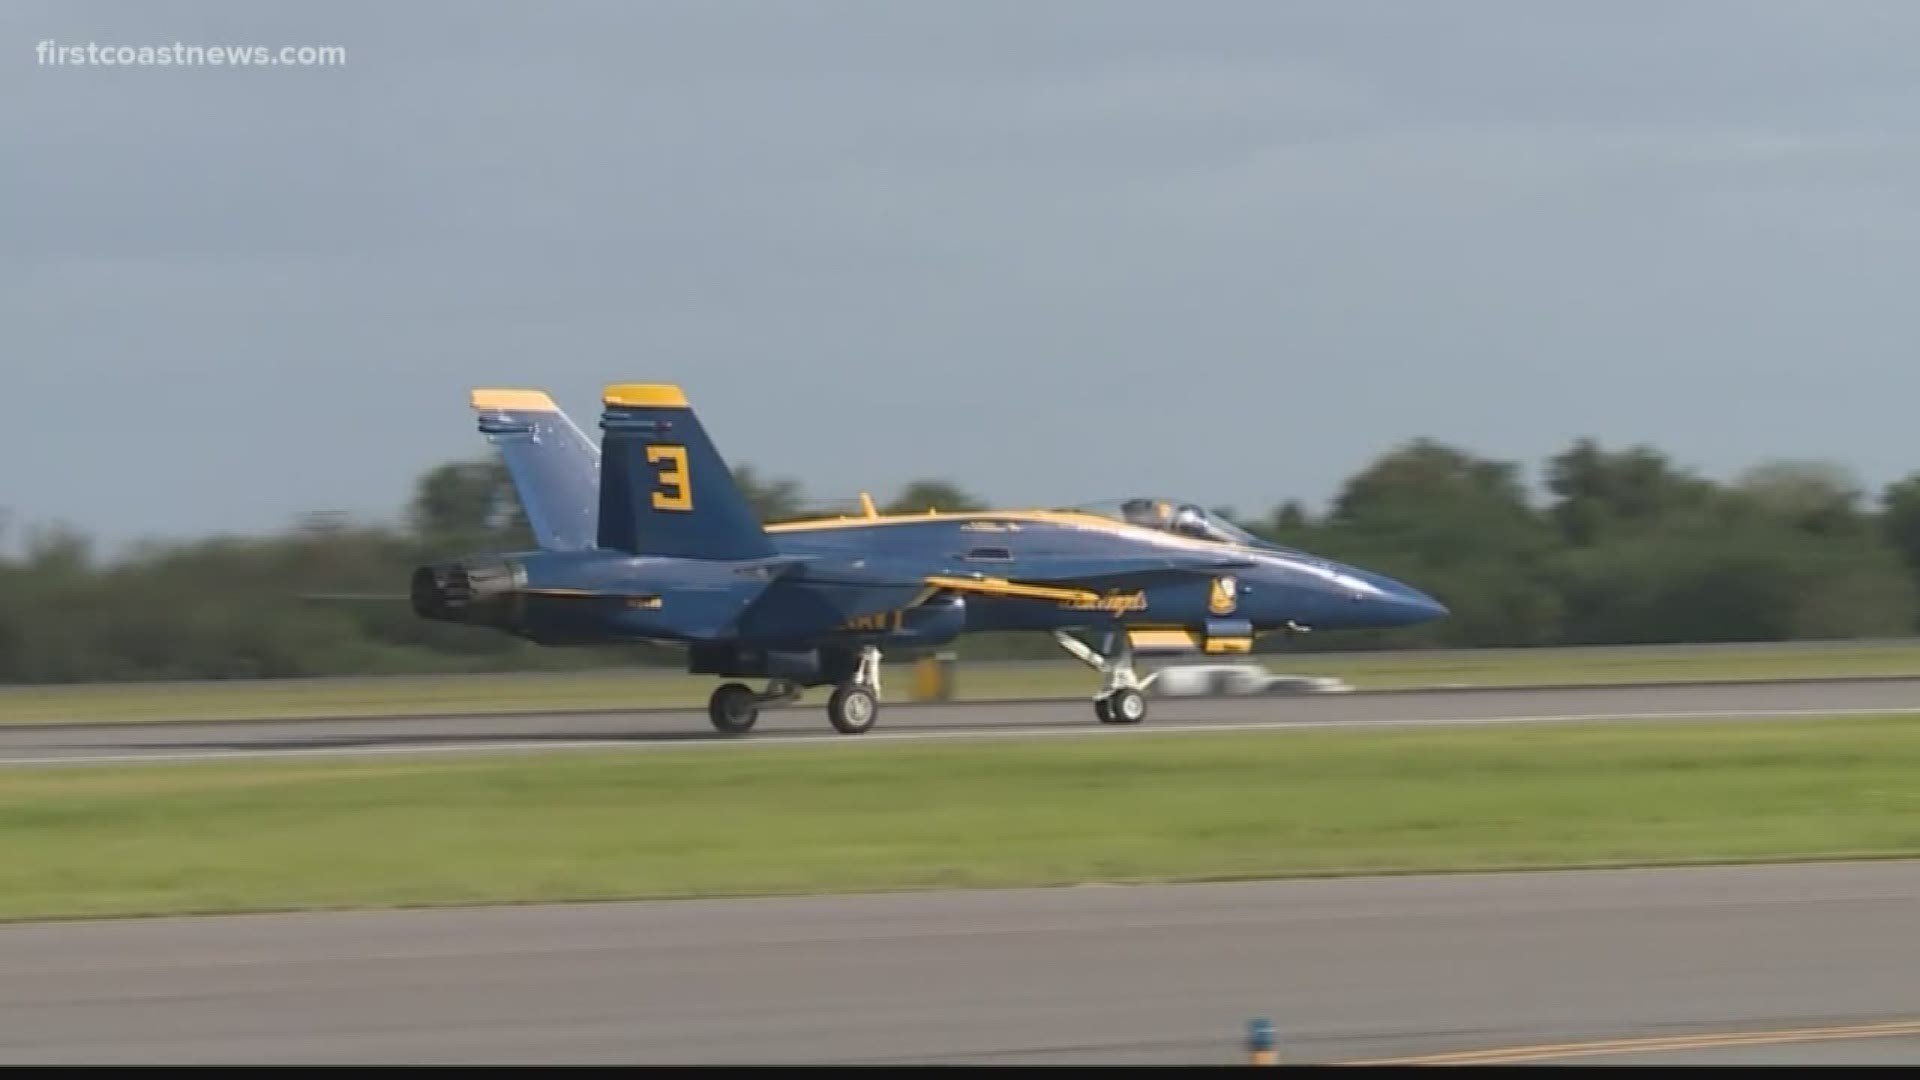 They arrived around 10 a.m. Thursday, ahead of the NAS Jacksonville Air Show, which is this weekend.